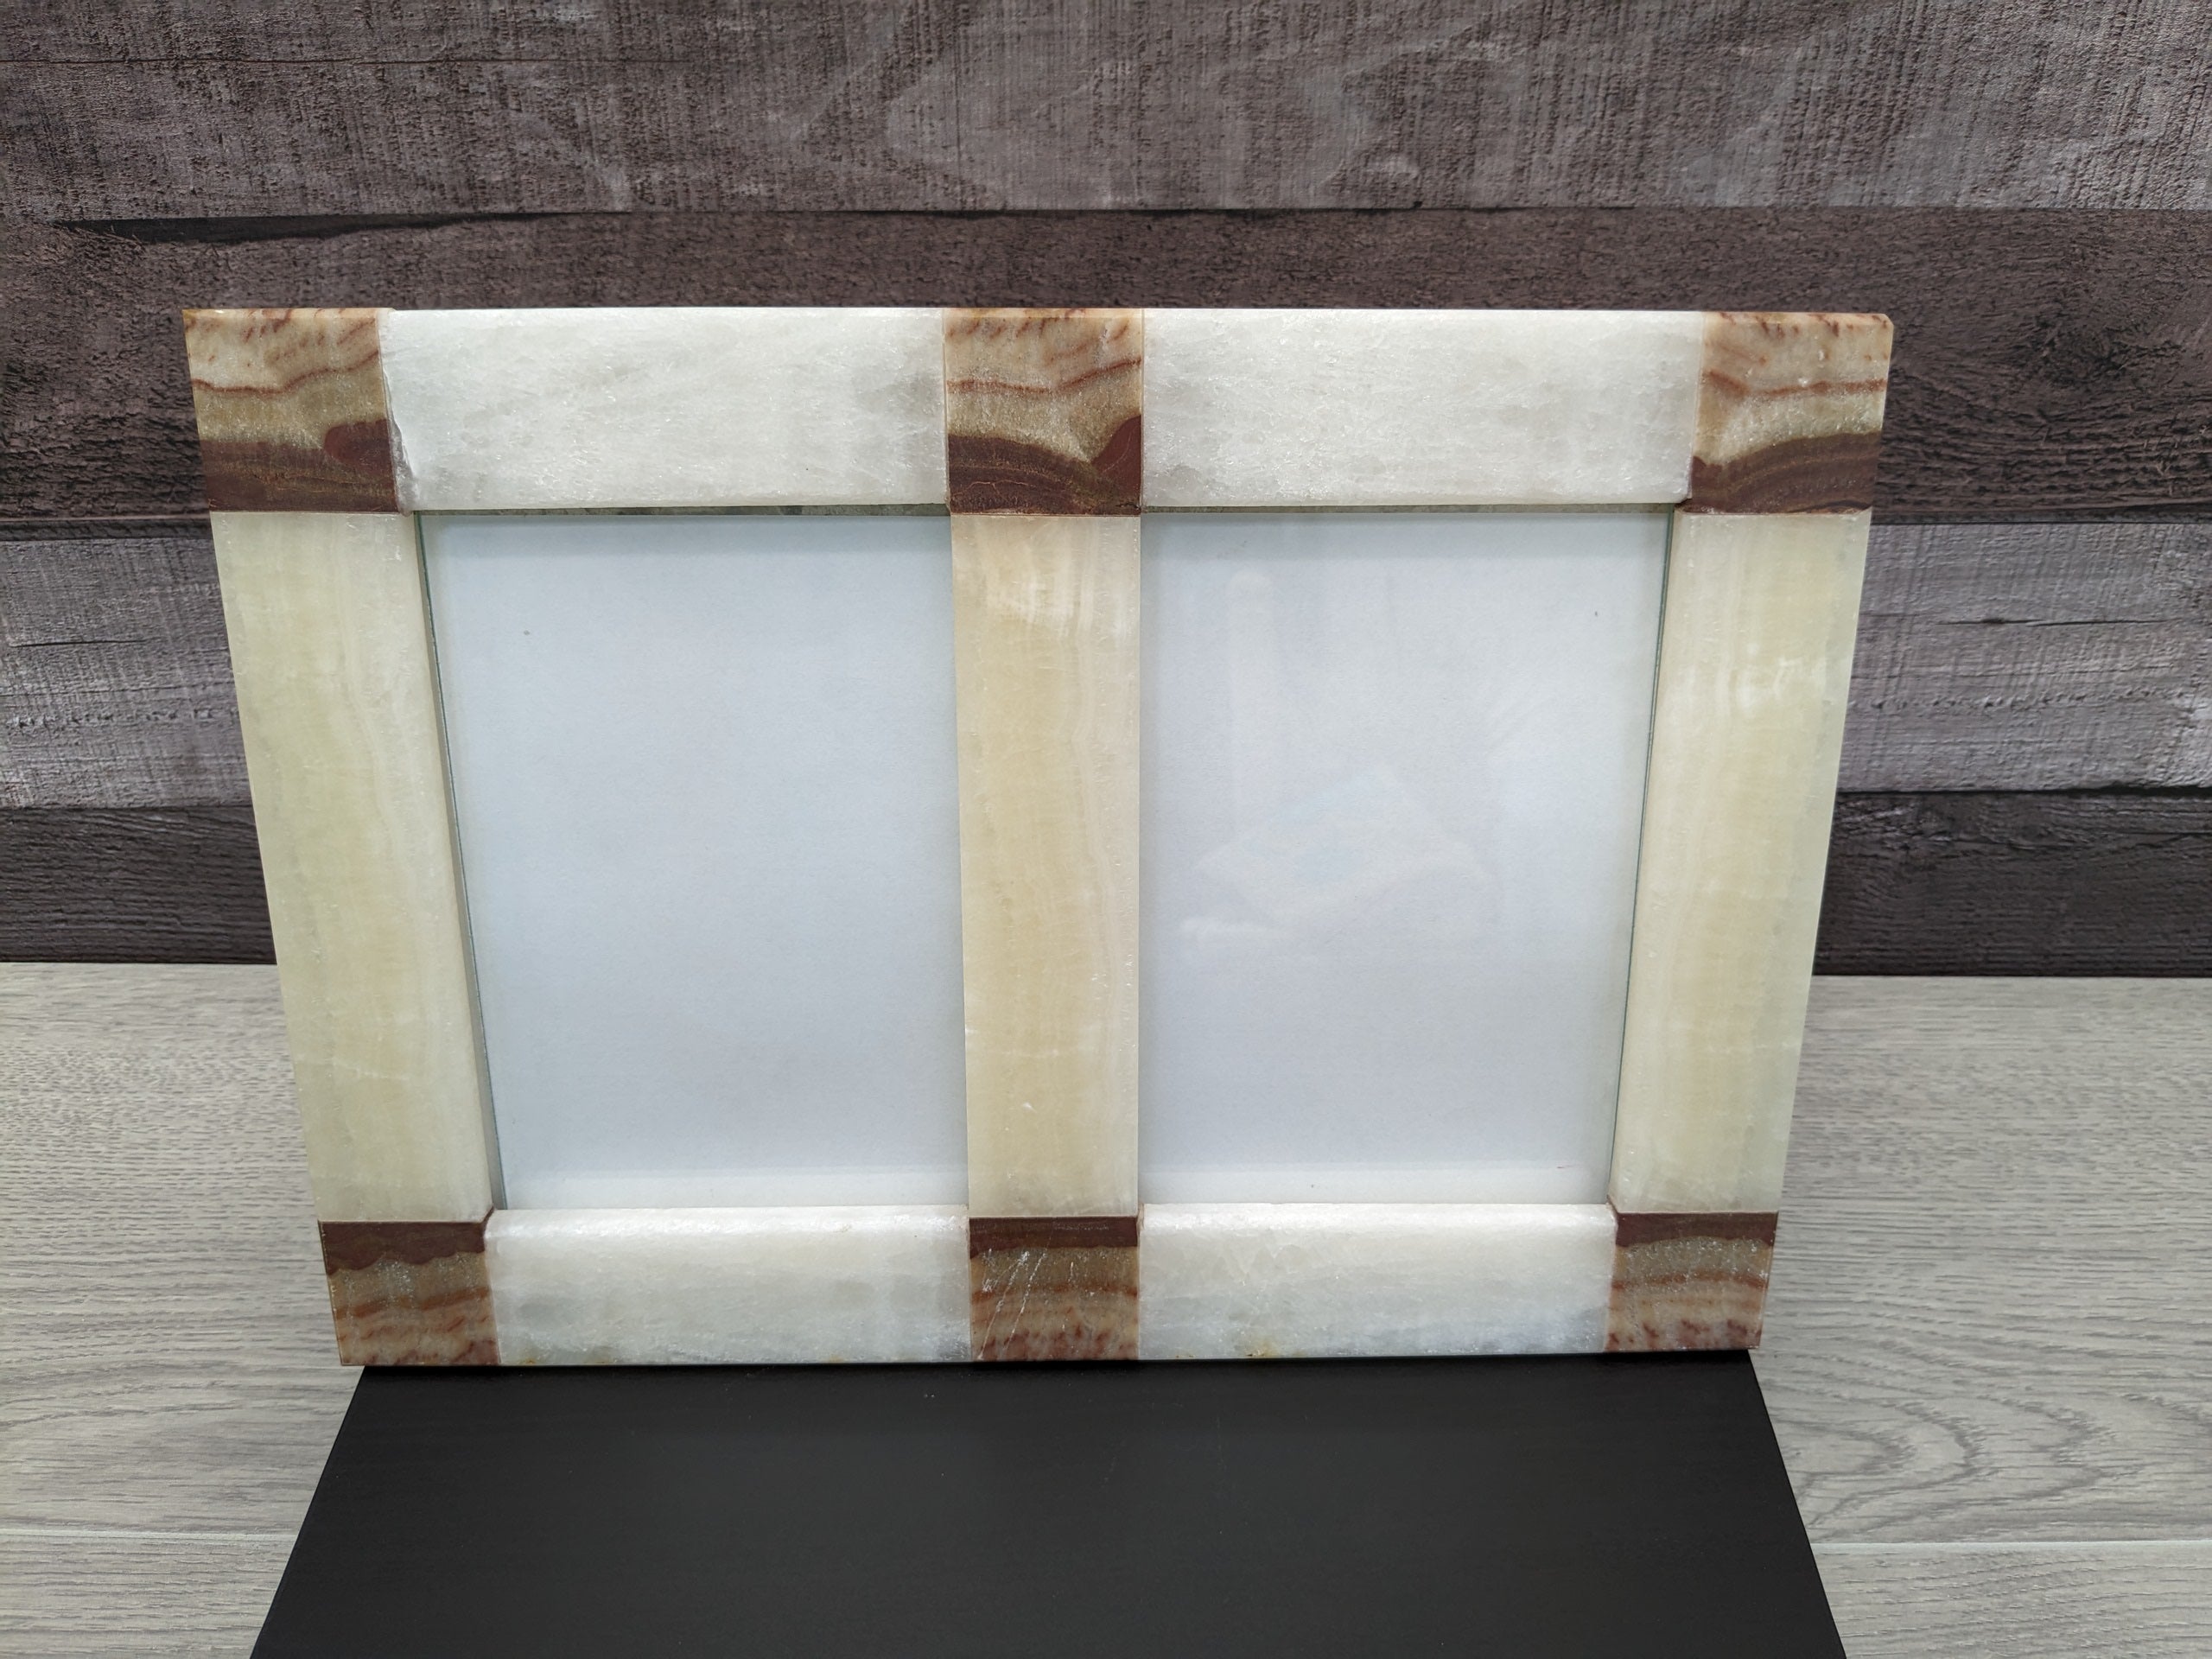 Beige and Brown Onyx and Travertine Stone Double Frame. Handmade in Mexico. We package and ship from the USA. Buy now at www.felipeandgrace.com.